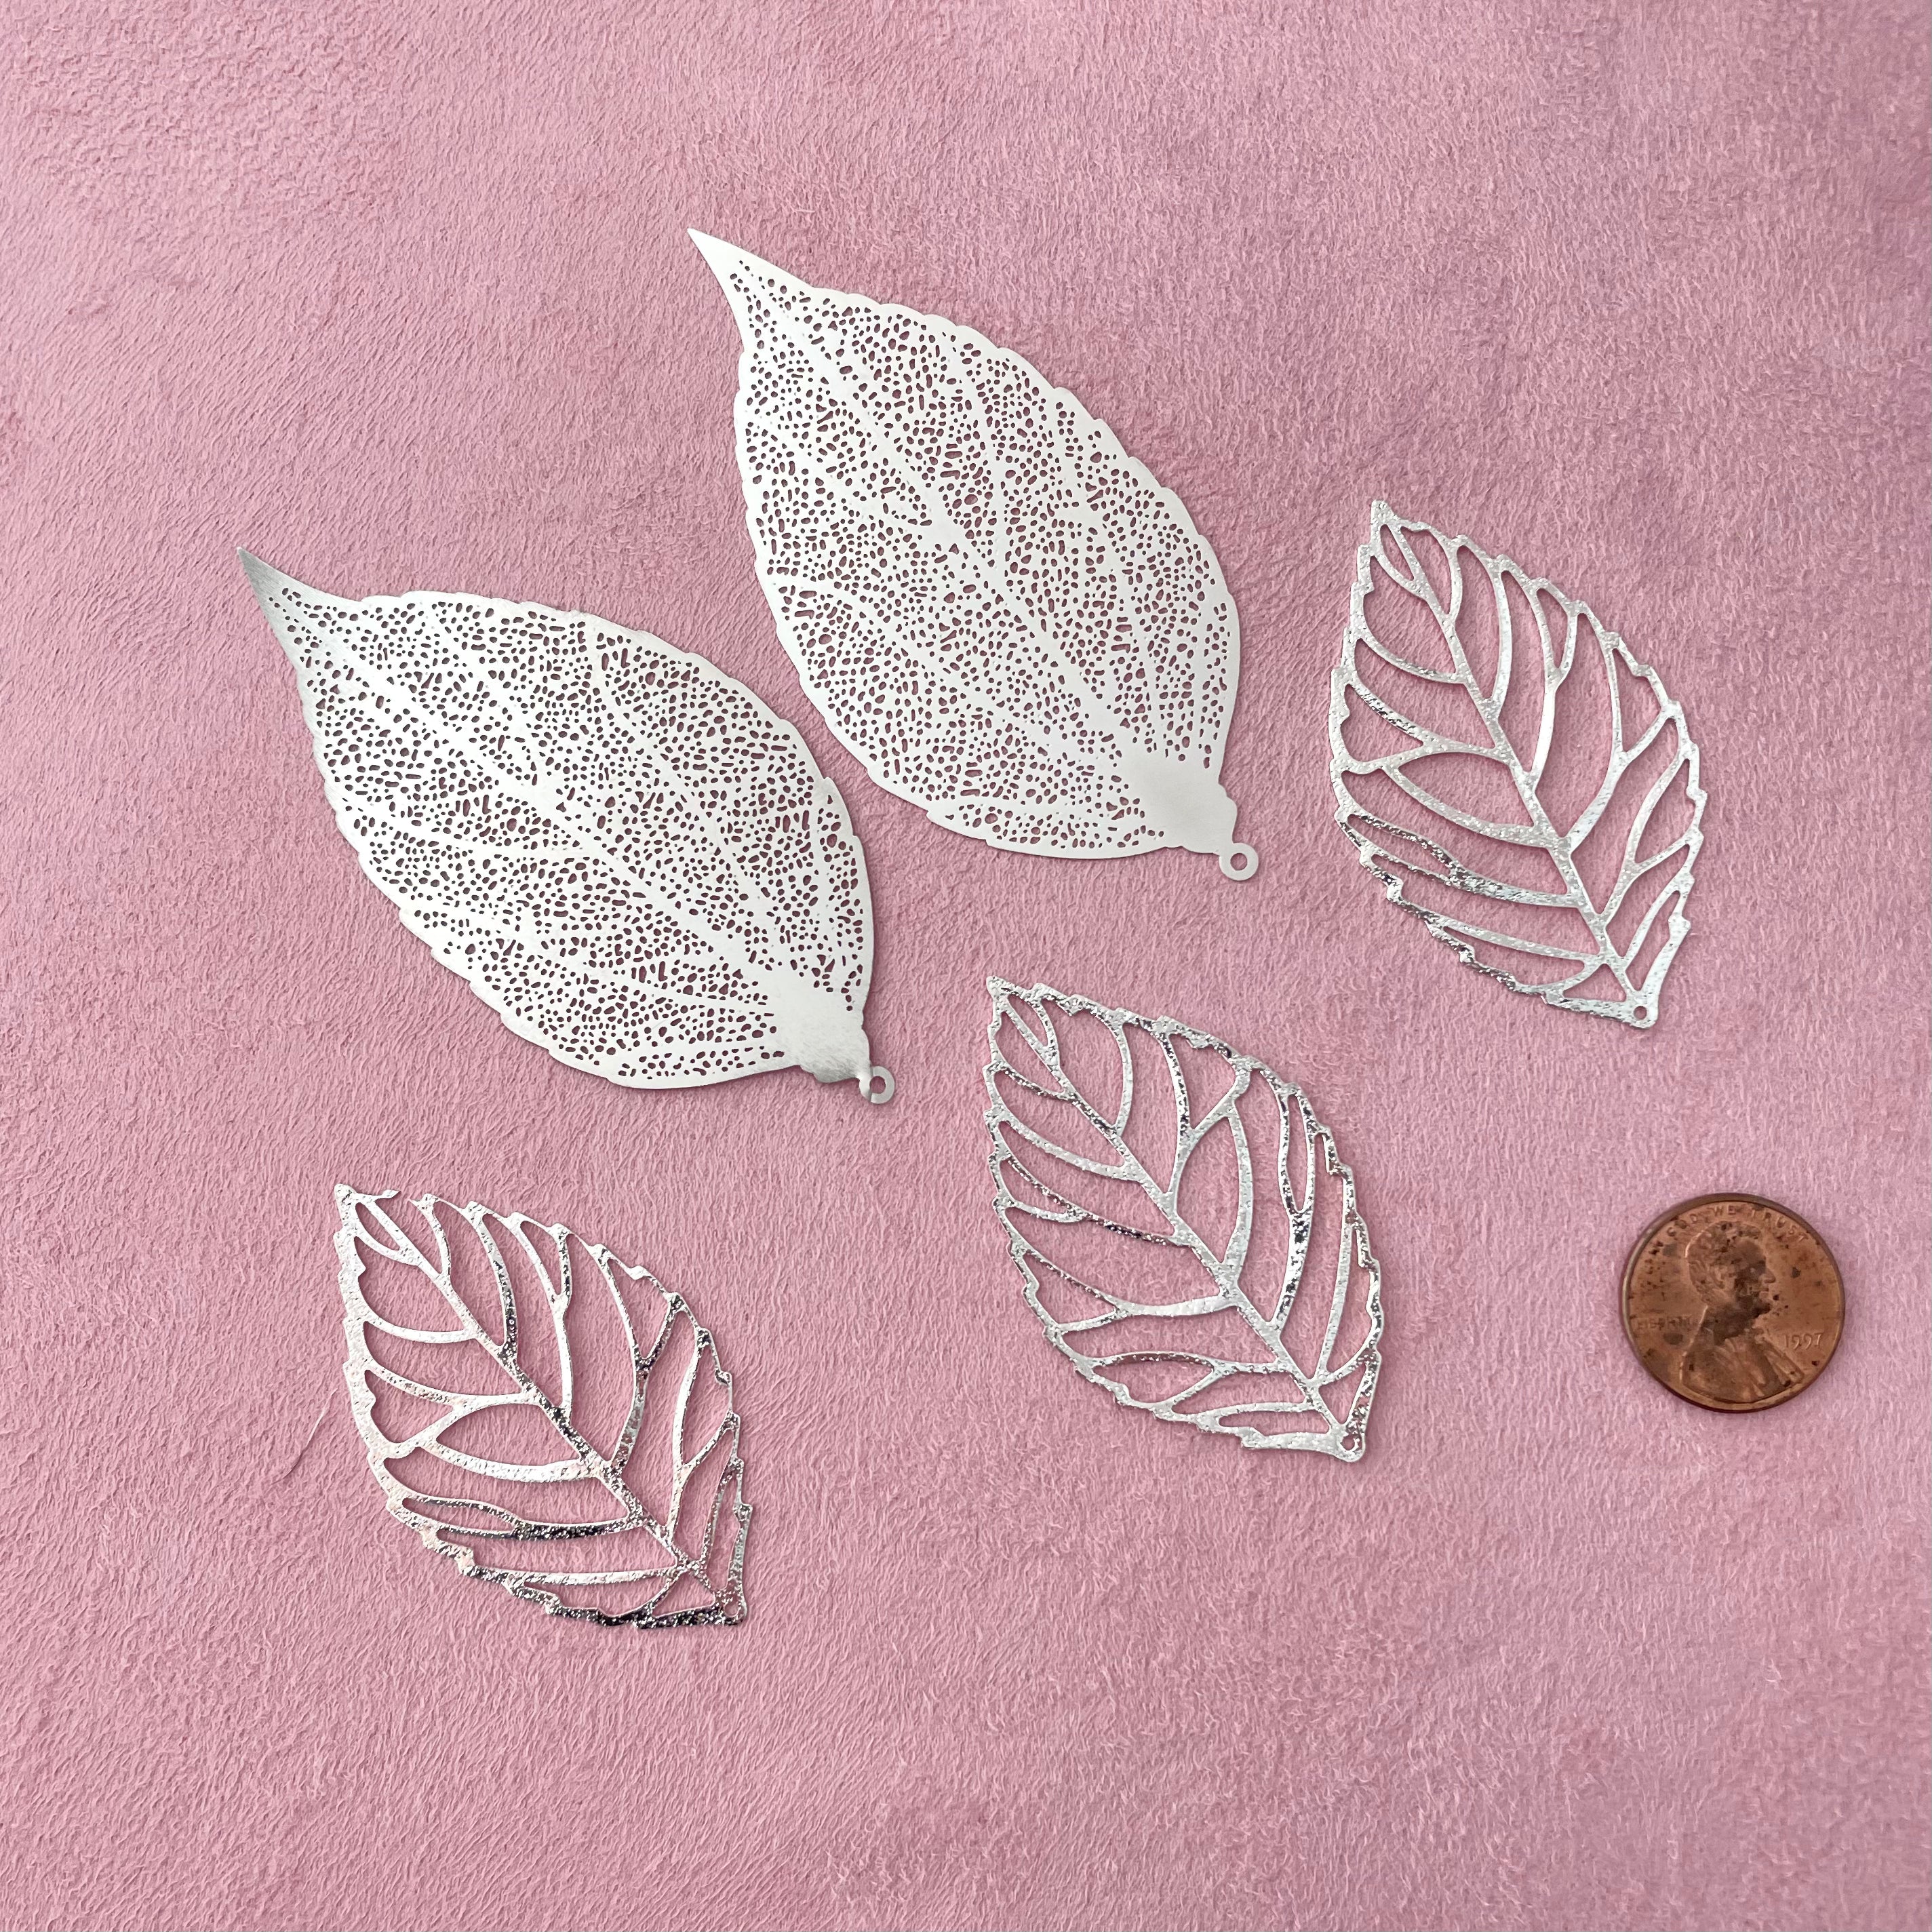 5 styling leaves including 3 silver leaves, 2 silver leaves that are larger with penny beside for size reference - wedding flat lay props from Champagne & GRIT